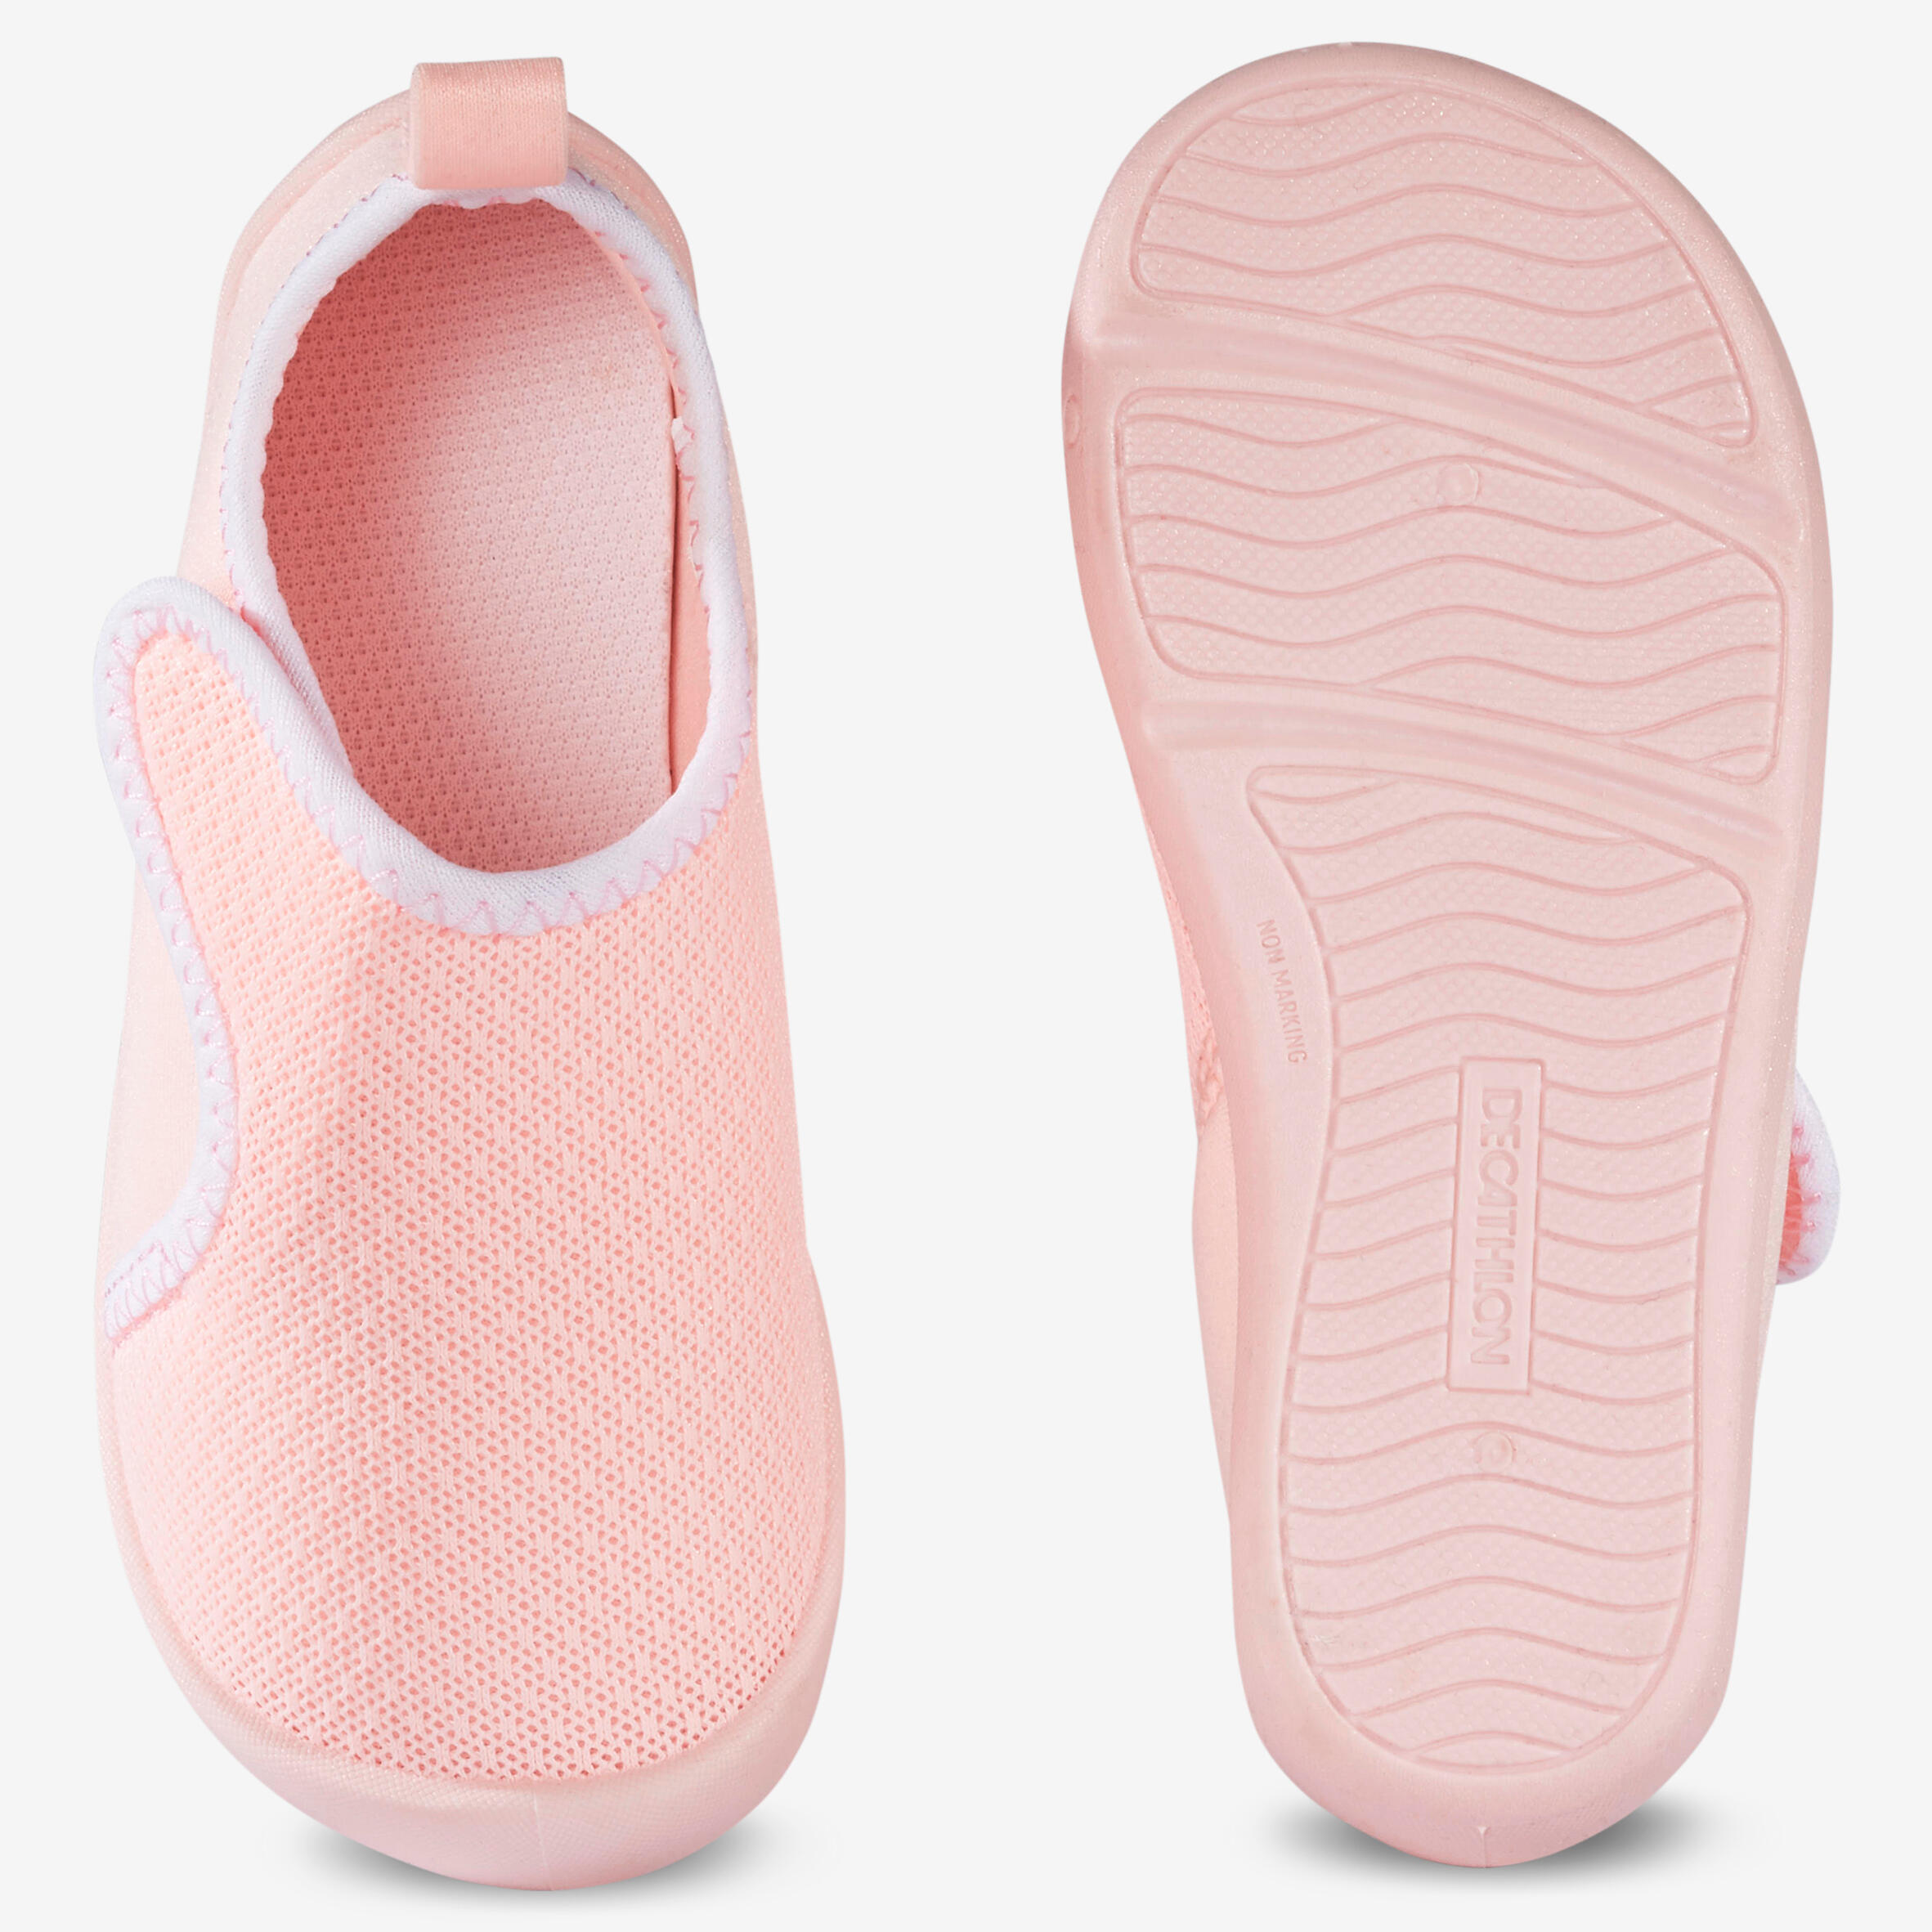 Kids' Bootees - Pink 4/8